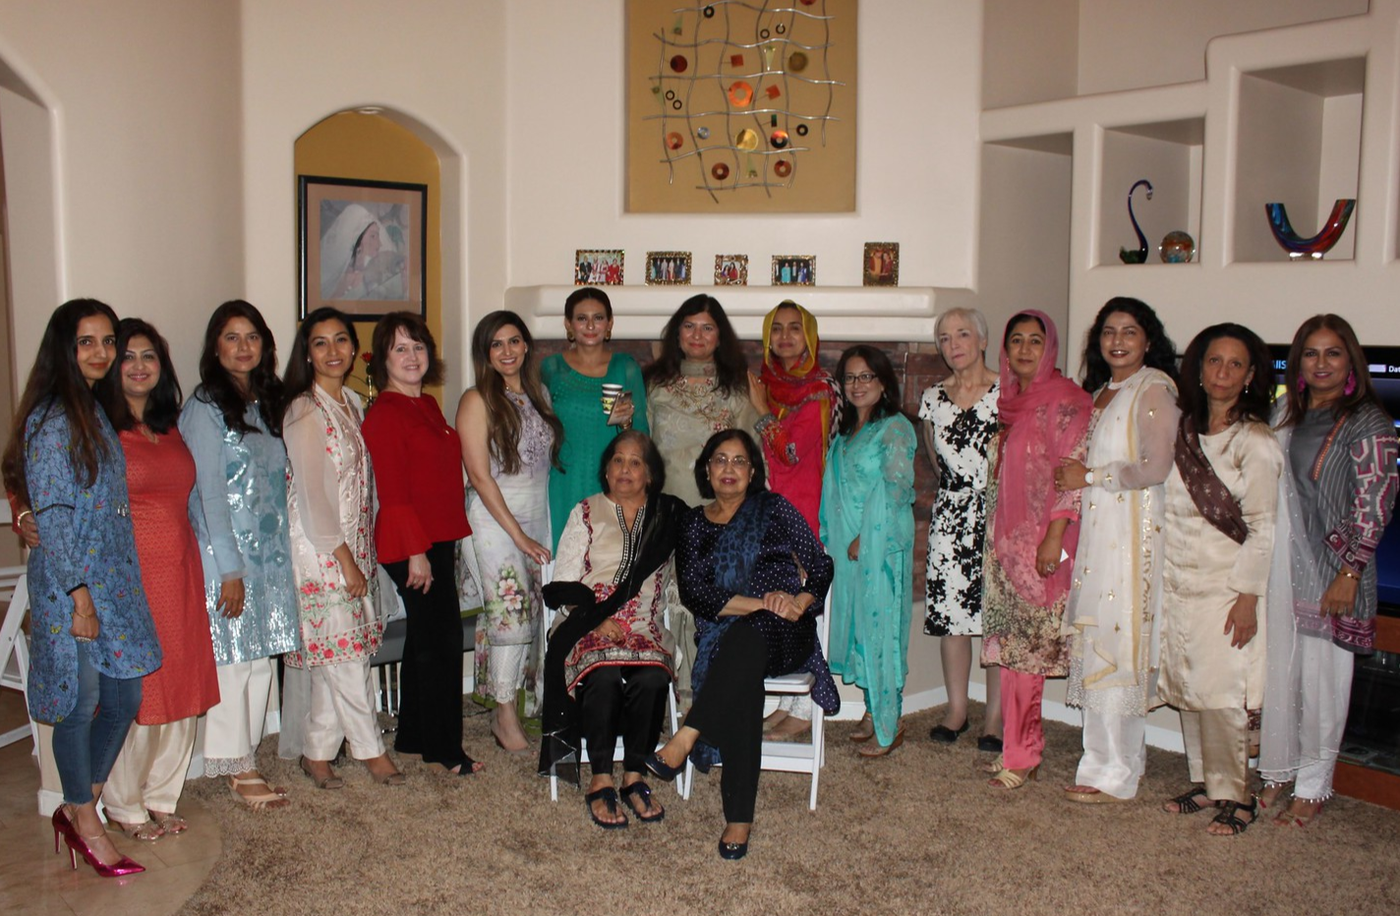 FBI Phoenix attended an event hosted by the Pakistan Information and Cultural Organization